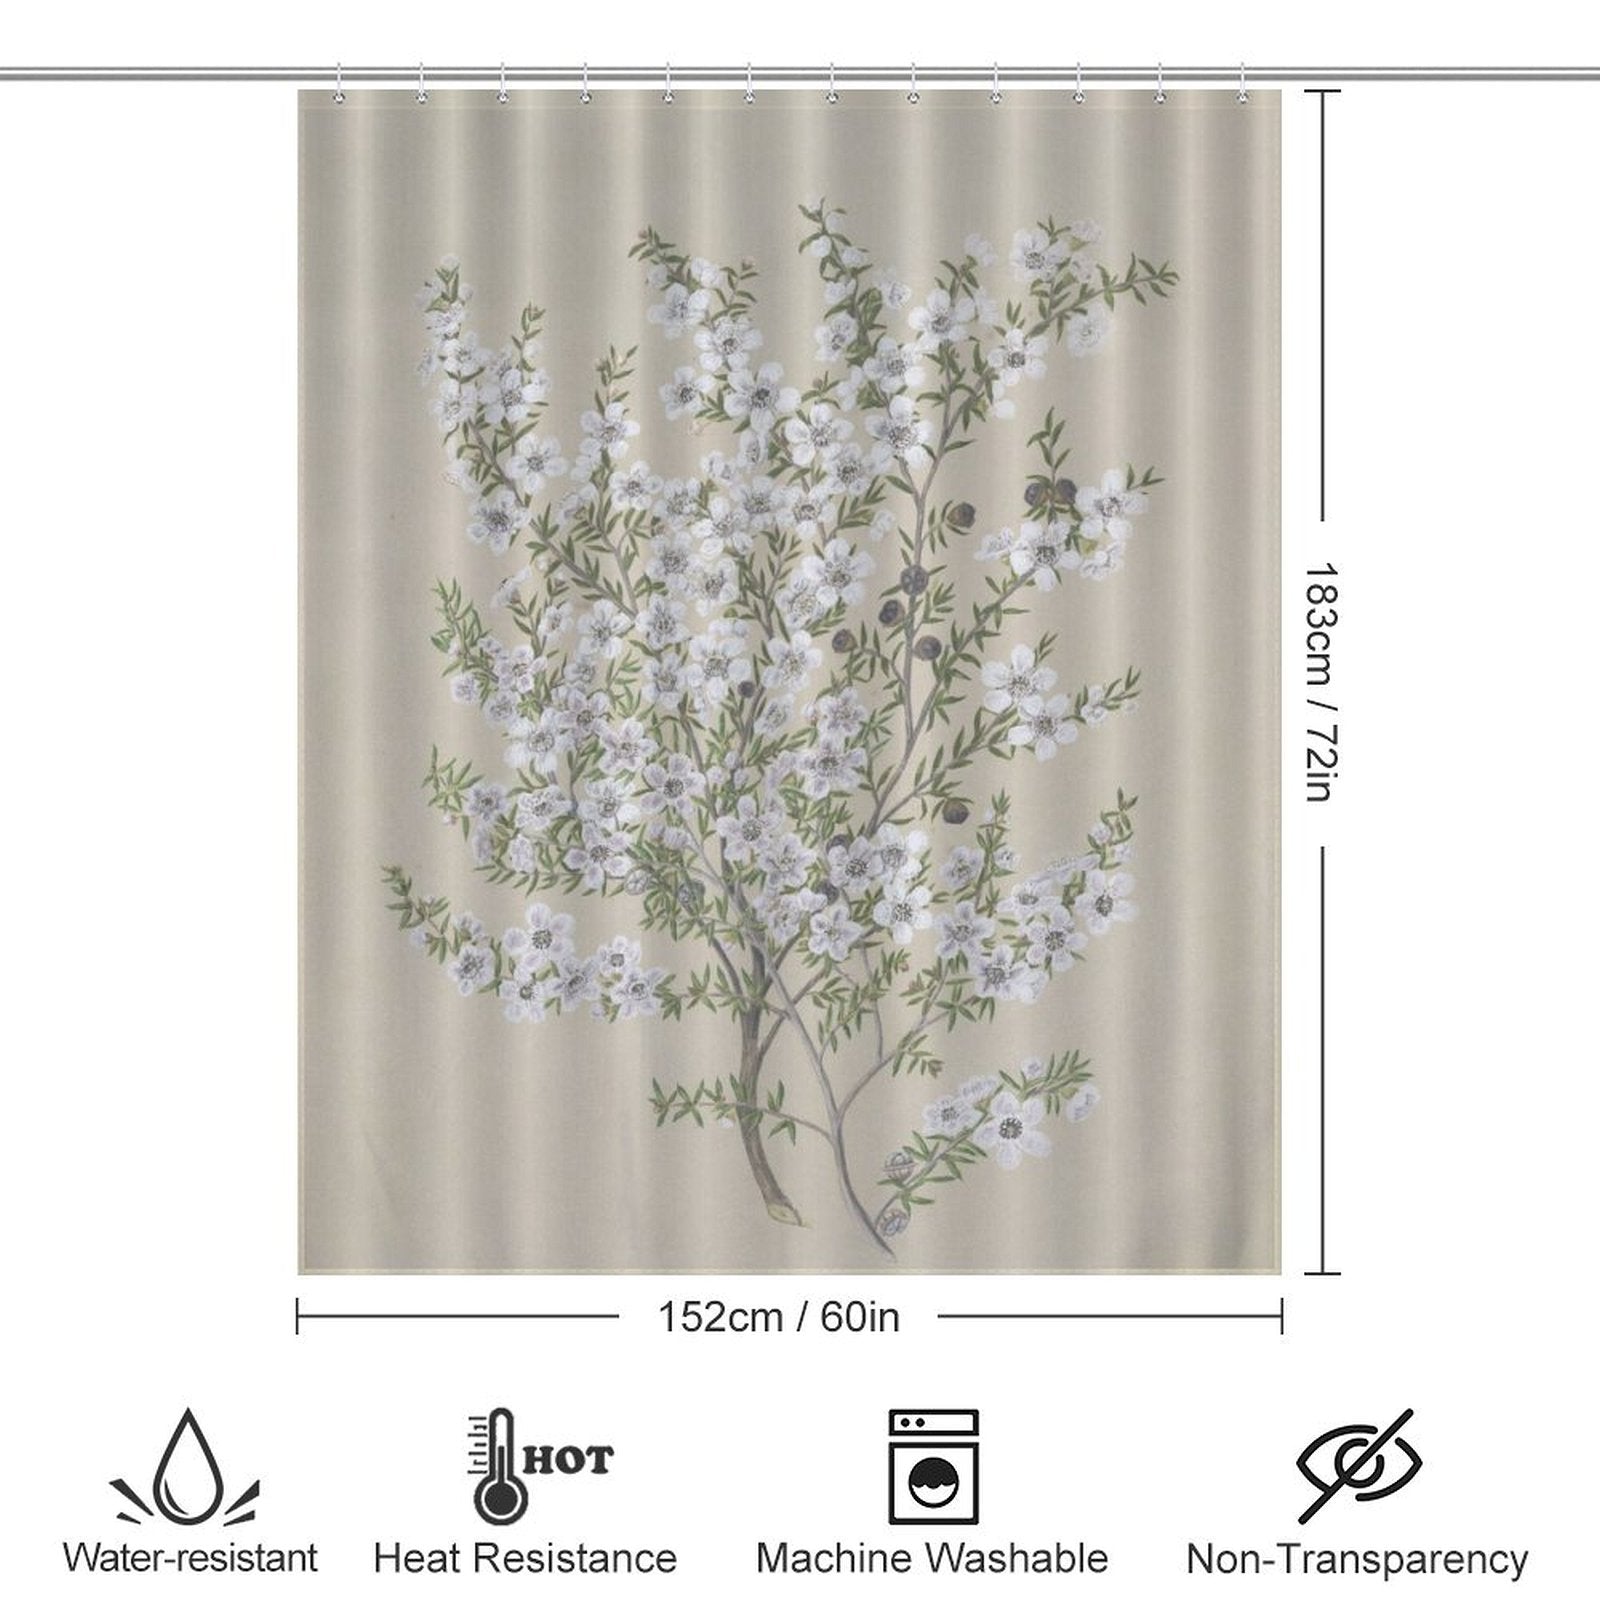 An image of a Retro Green Flower Shower Curtain-Cottoncat by Cotton Cat with dimensions 183cm x 152cm (72in x 60in). It boasts a vintage bathroom decor style, is water-resistant, heat resistant, machine washable, and non-transparent. Illustrations clearly indicate these features.